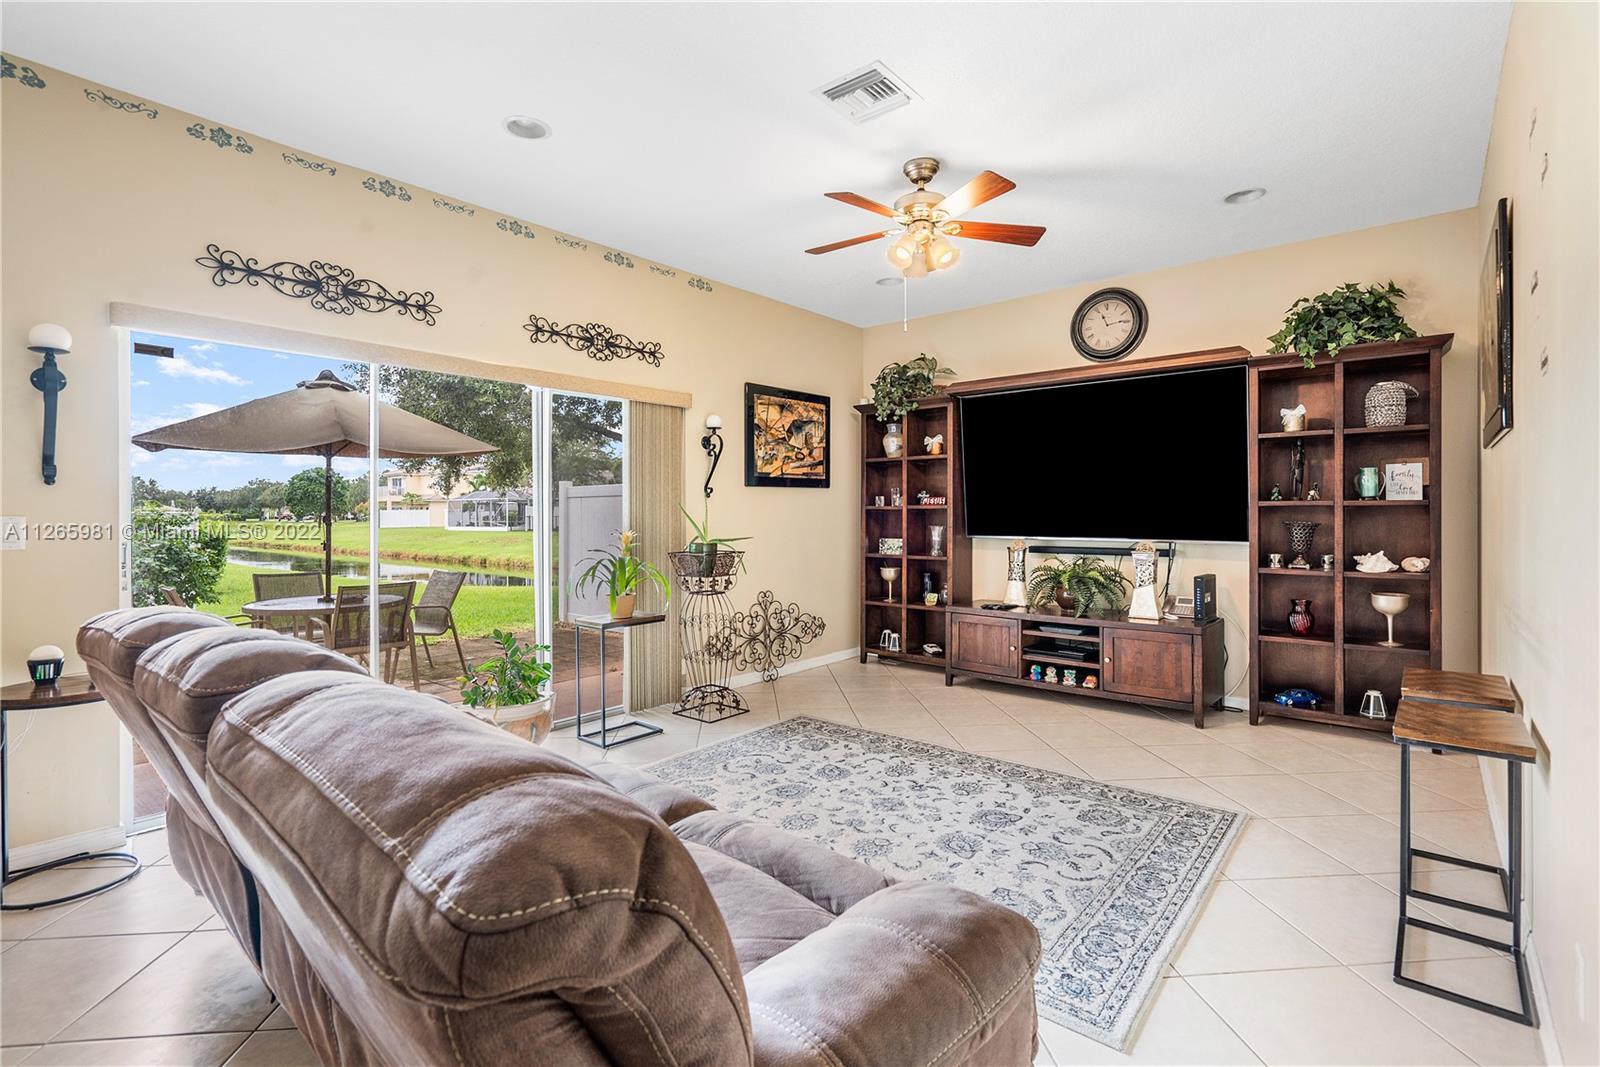 This spacious 4 Bedroom and 3 Bathroom is one of the largest models located in the gated community o